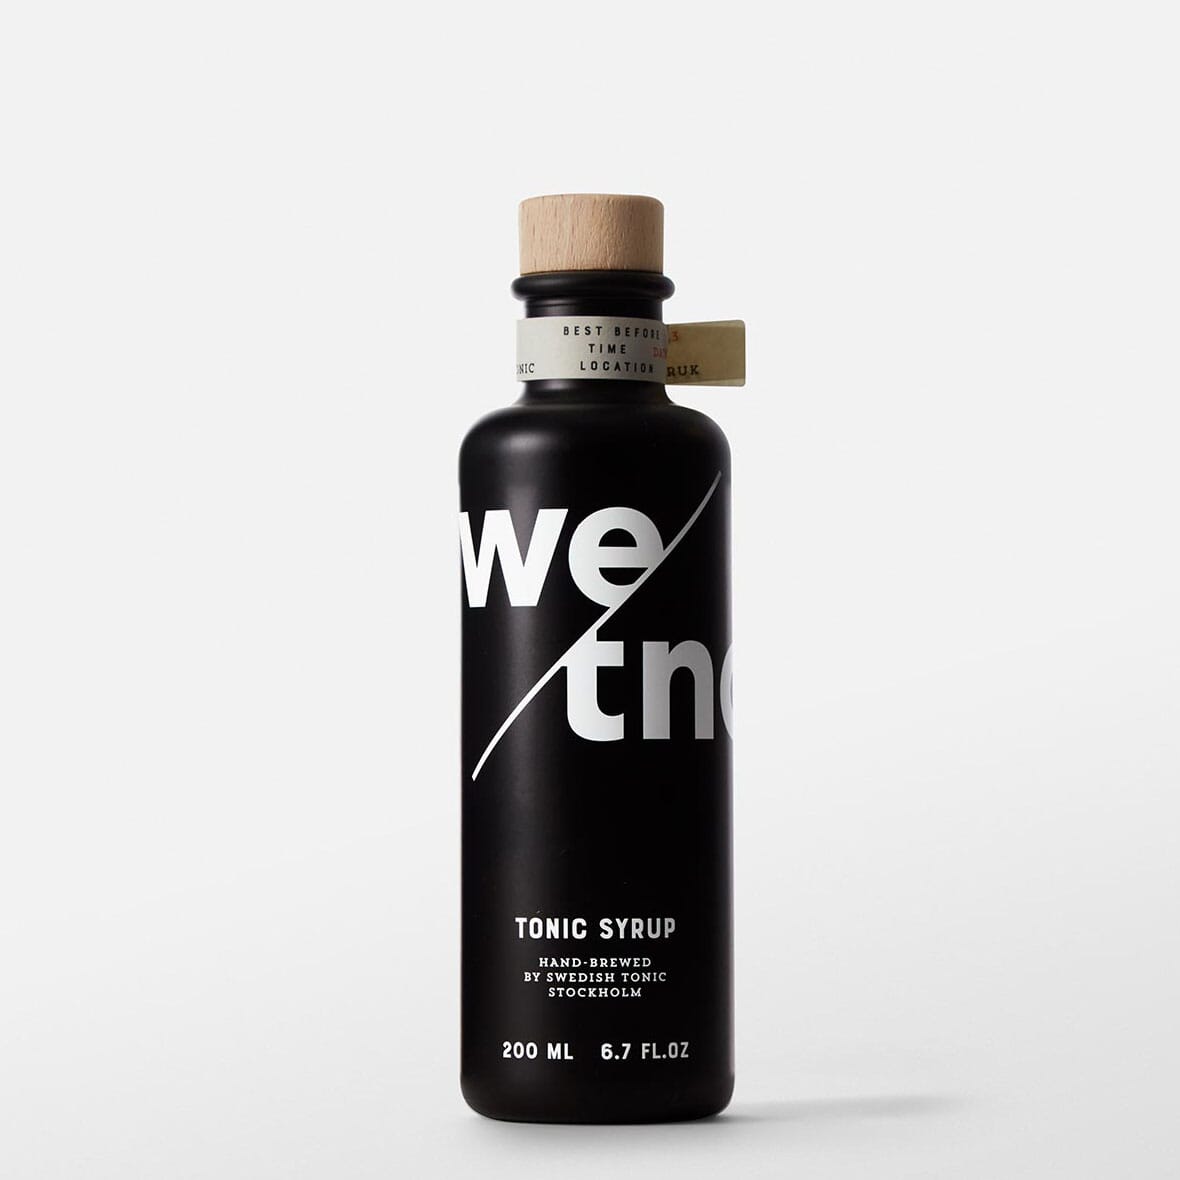 Award-winning tonic syrup from Swedish Tonic that takes your GT from ordinary to extraordinary